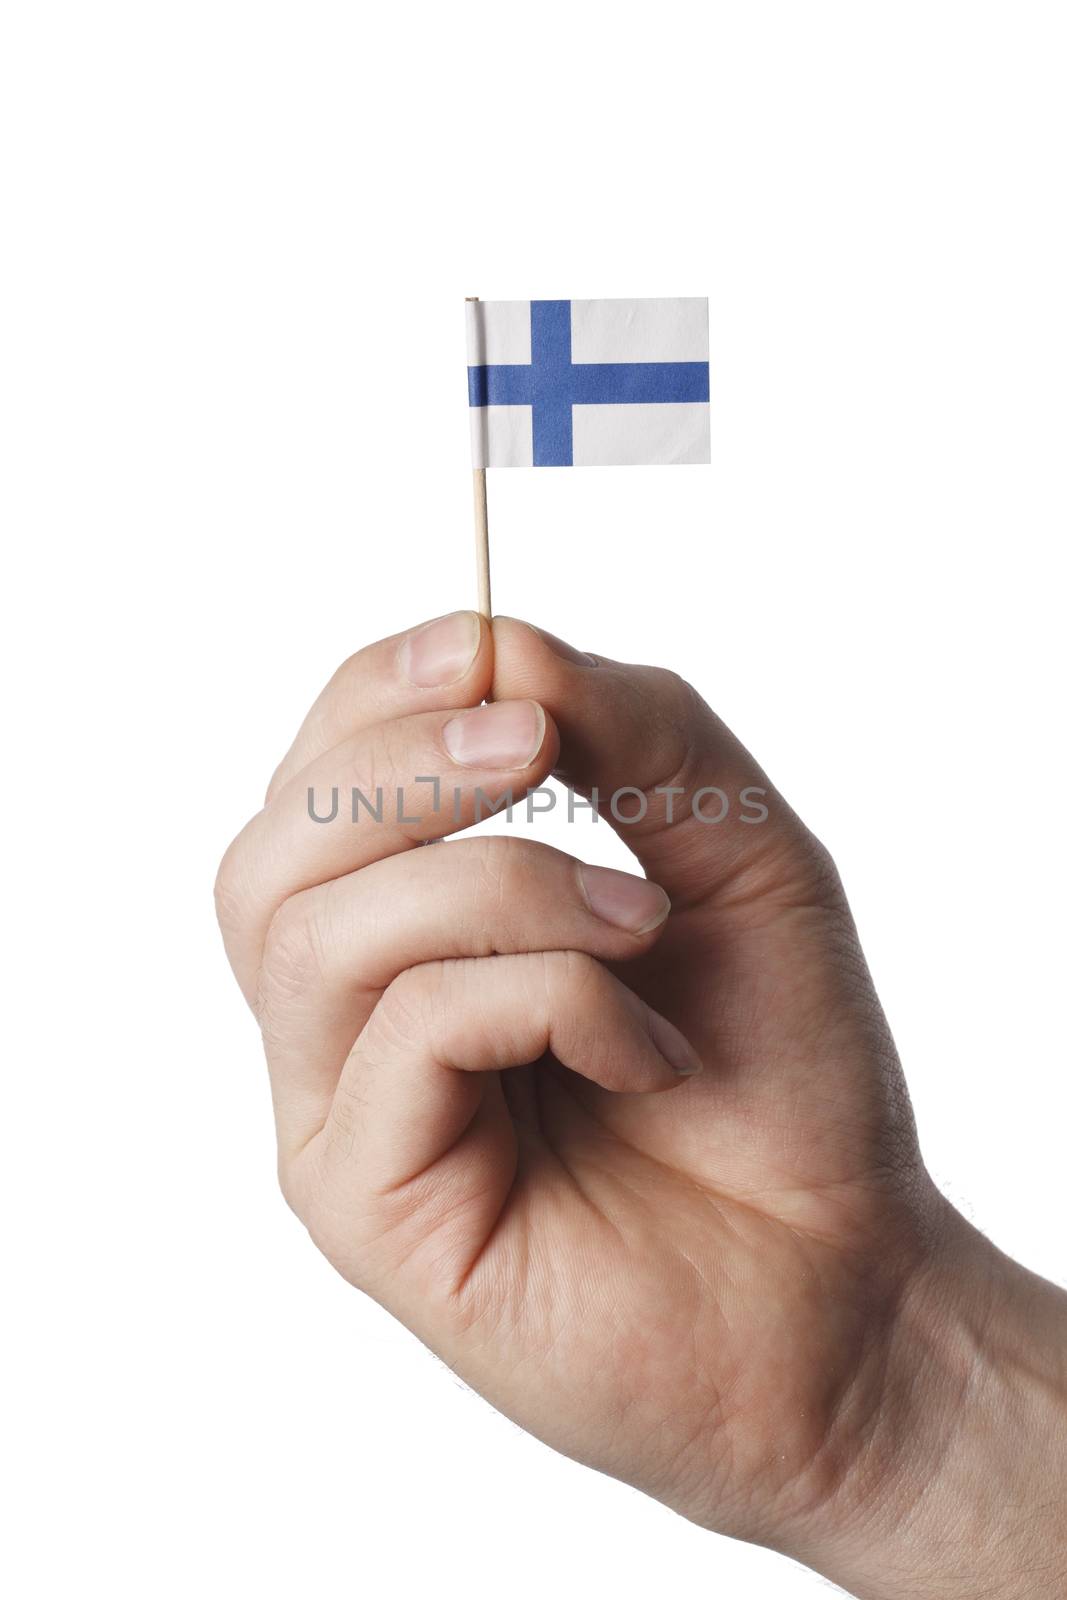 Finland by Stocksnapper